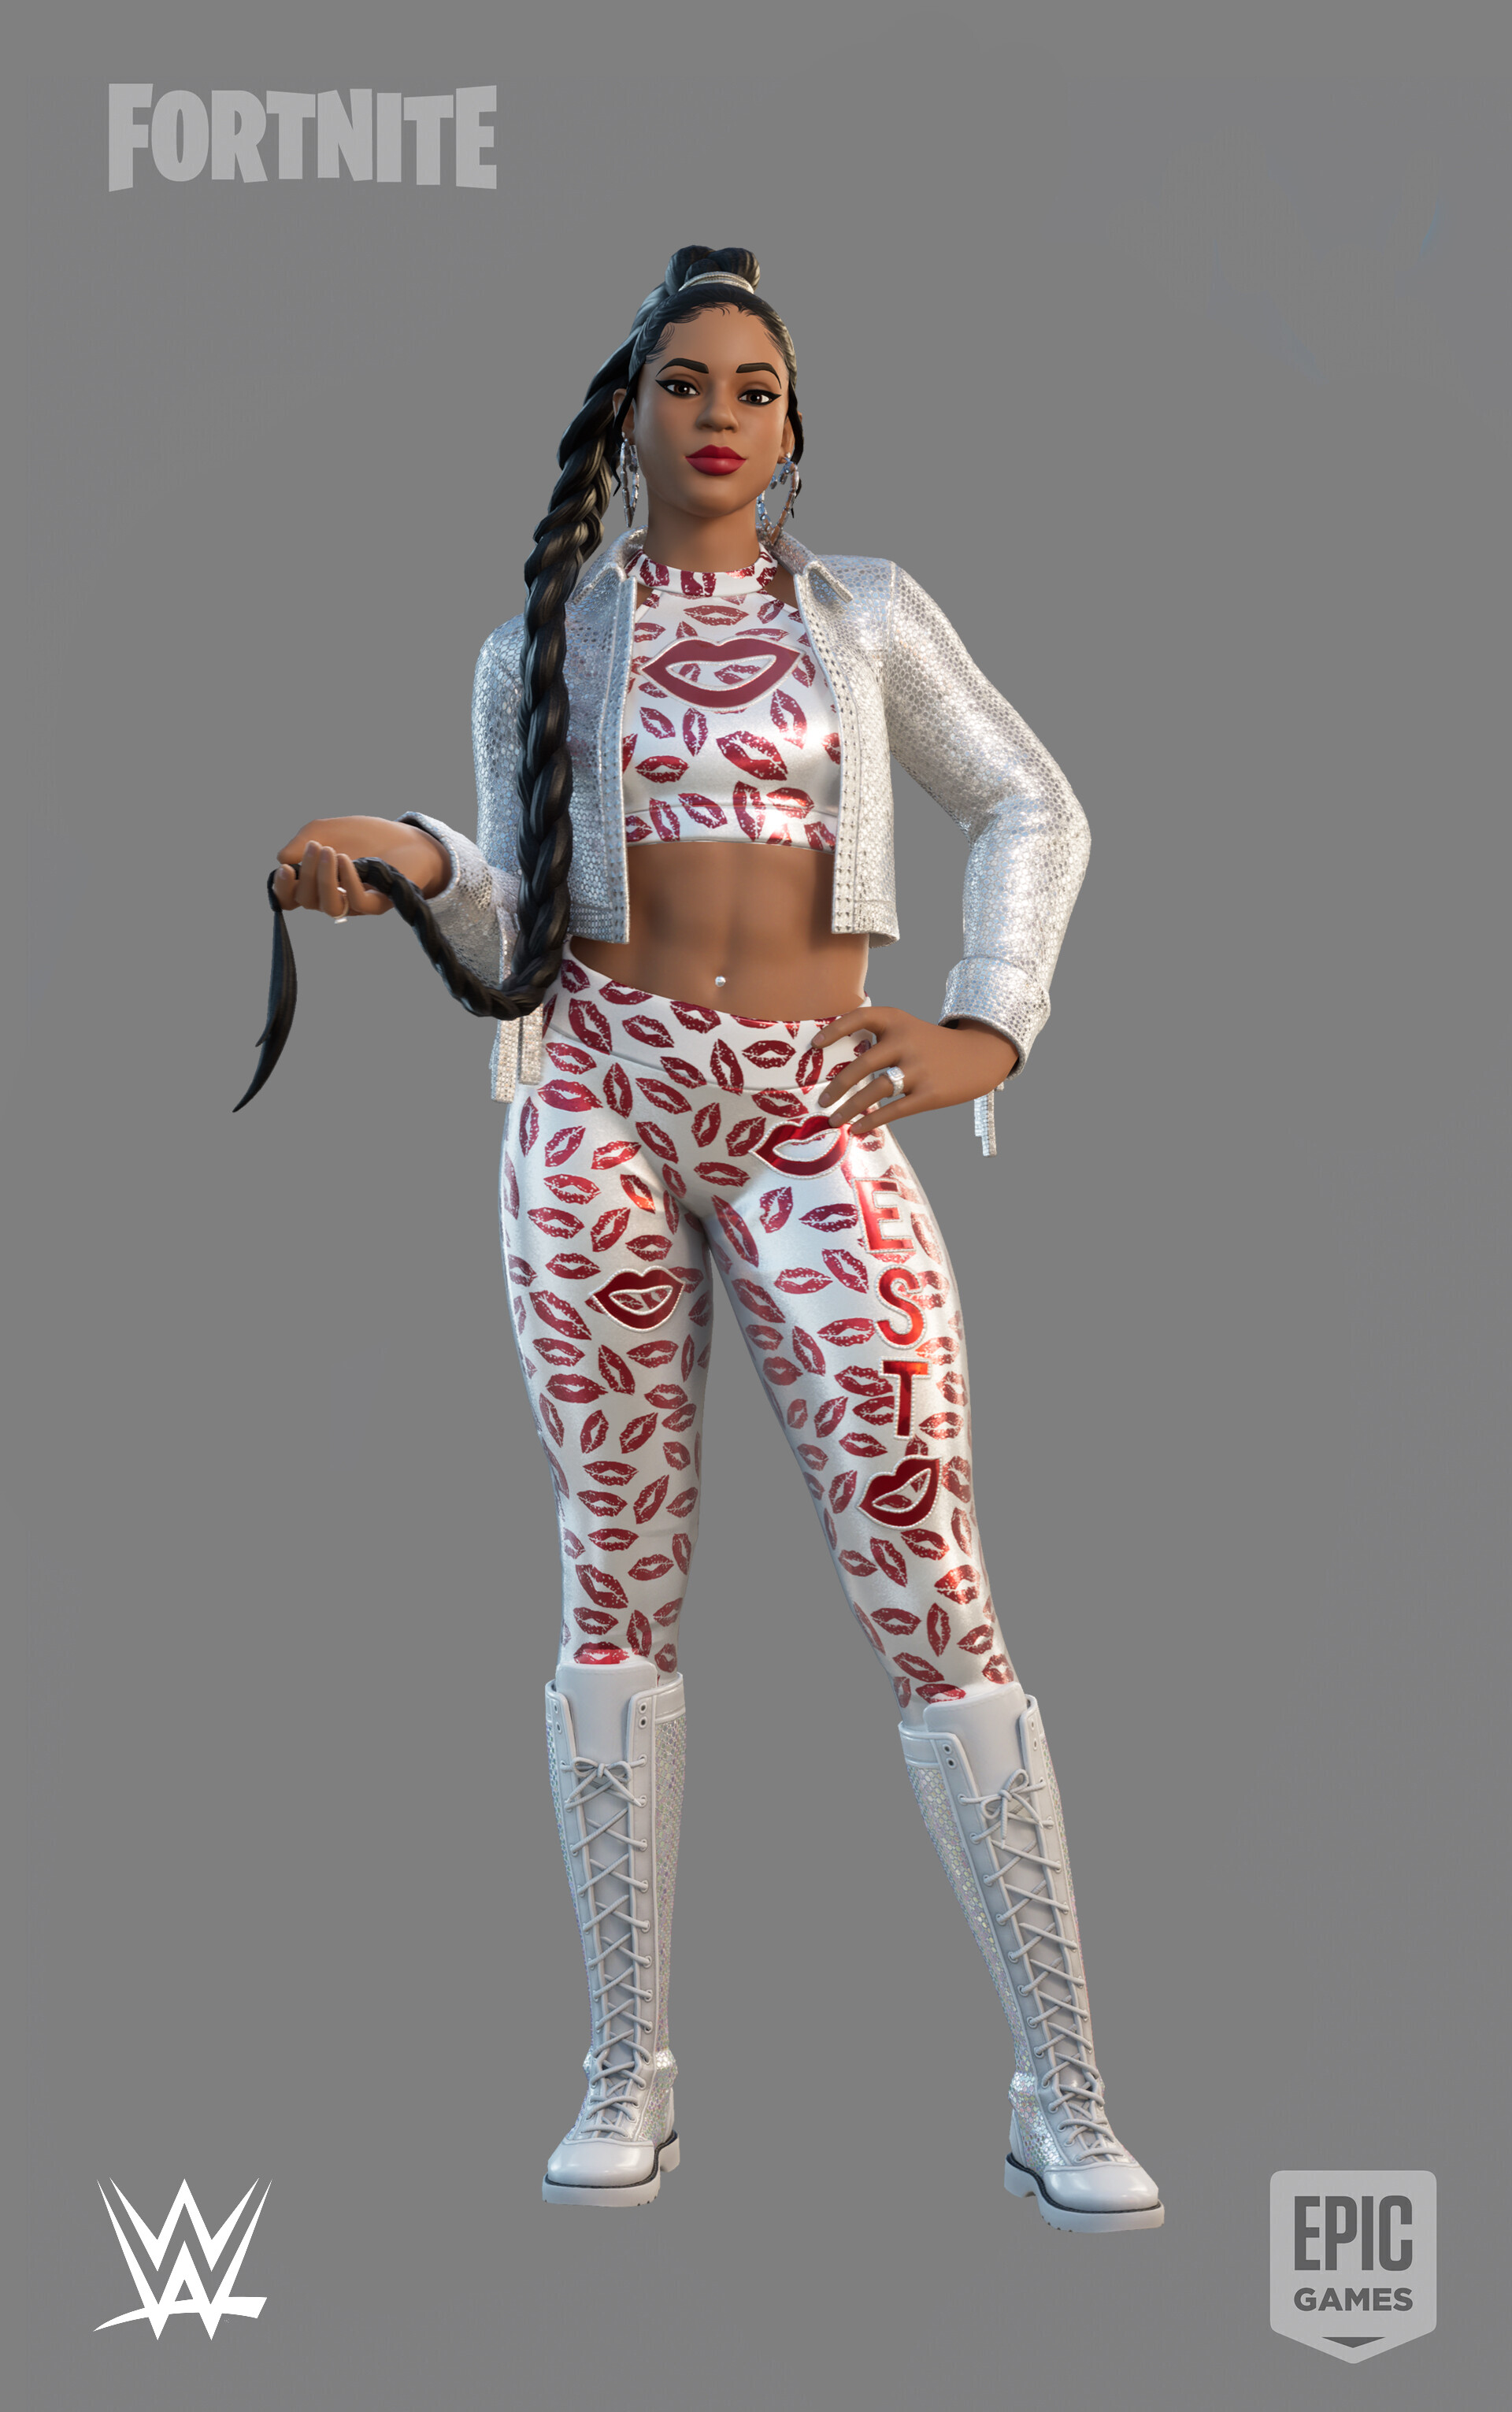 Becky Lynch And Bianca Belair Skins And Items Added To Fortnite